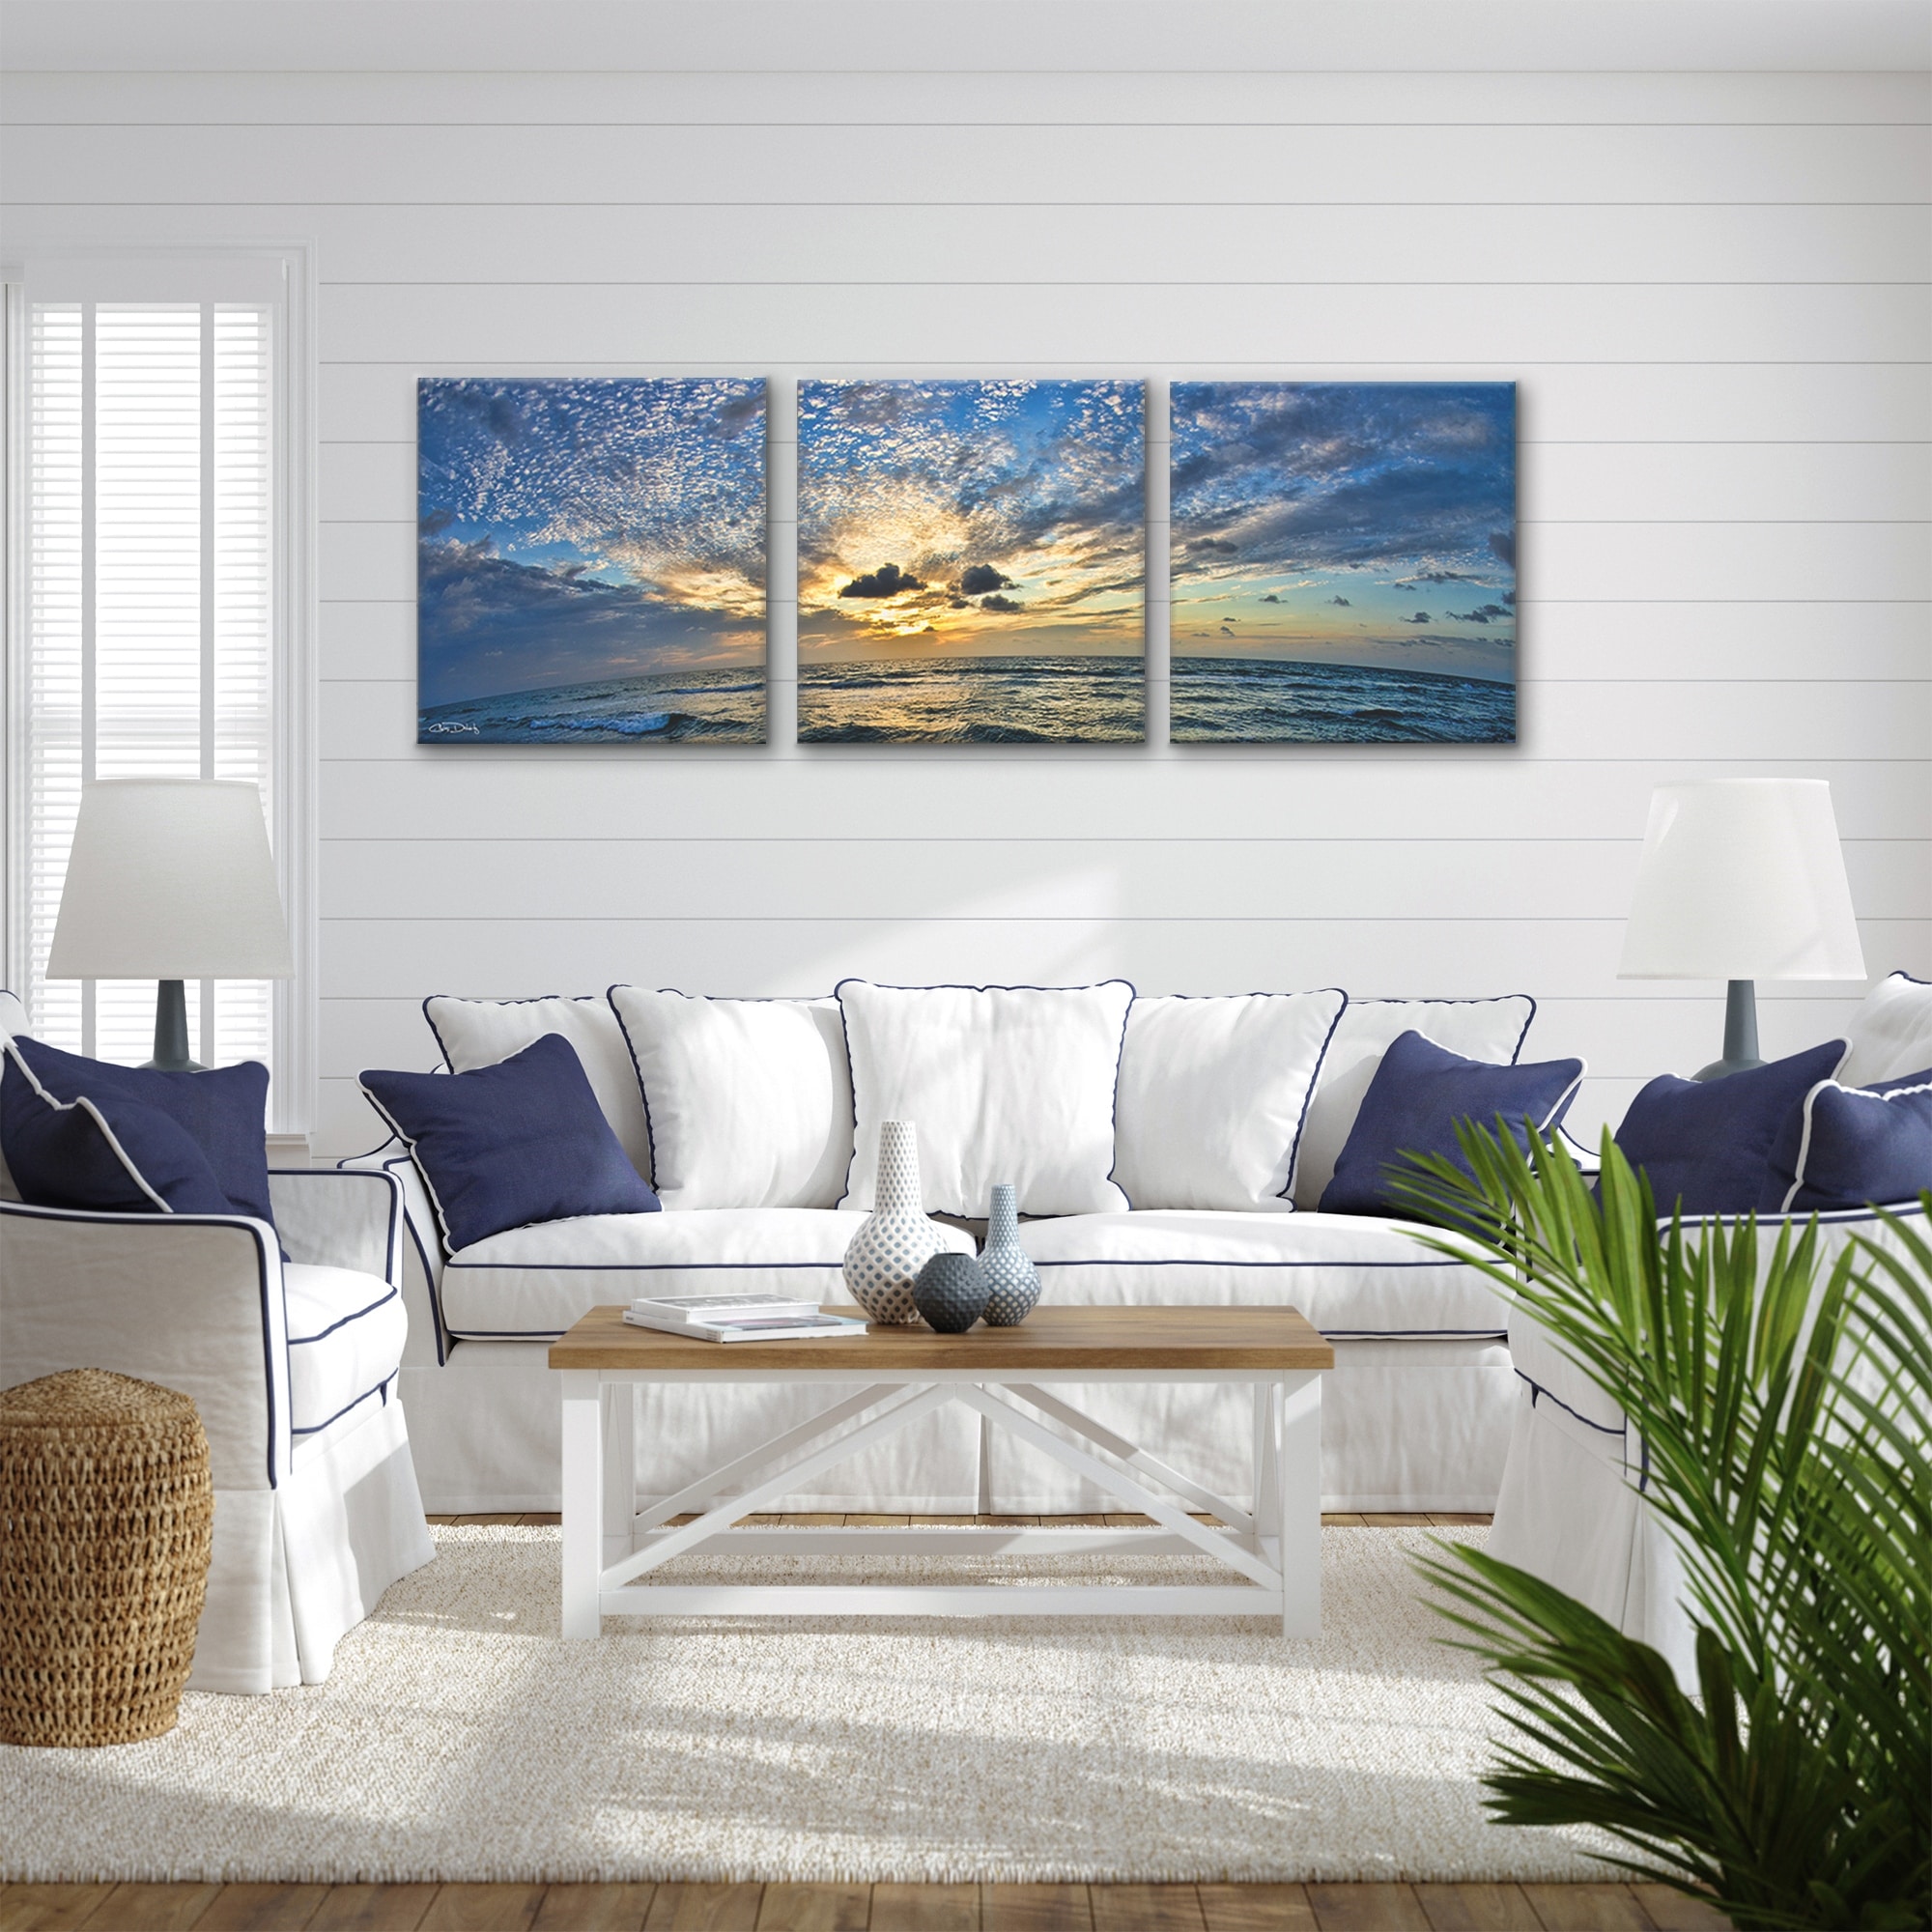 https://ak1.ostkcdn.com/images/products/is/images/direct/40fa7cd0b3c9ae7a7d0c6d67ce8dddc44dd47abc/Ready2HangArt-%27Ocean%27-3-Piece-Wrapped-Canvas-Wall-Art-Set.jpg